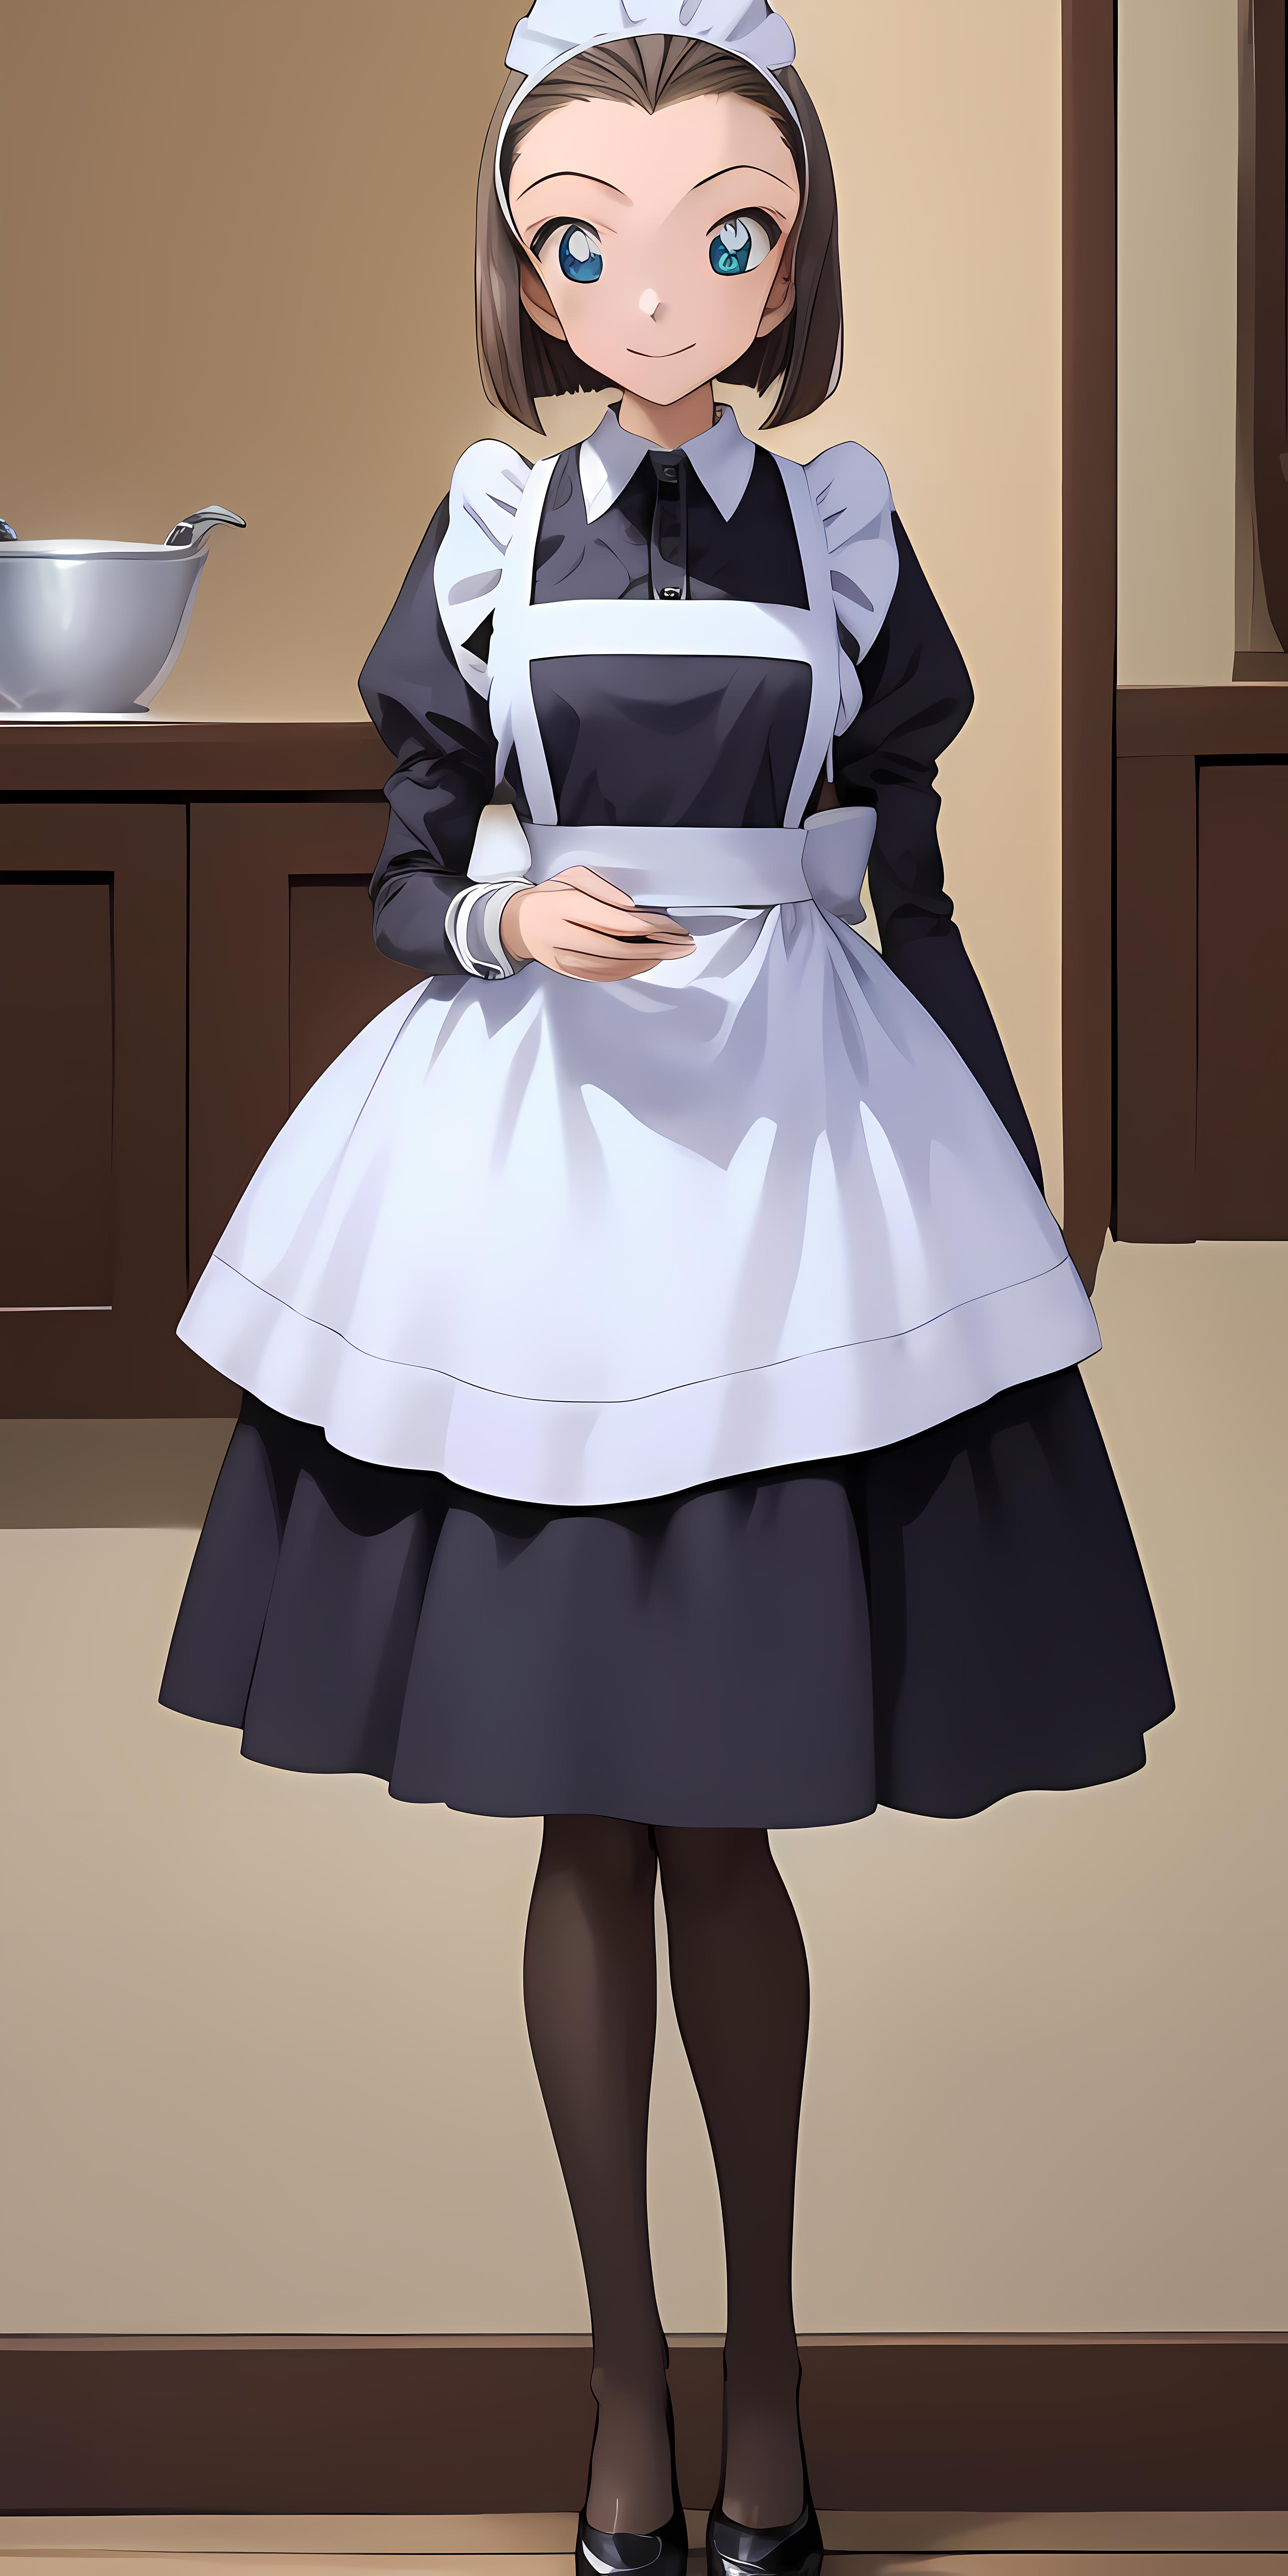 Traditional Maid Dress image by oldperson